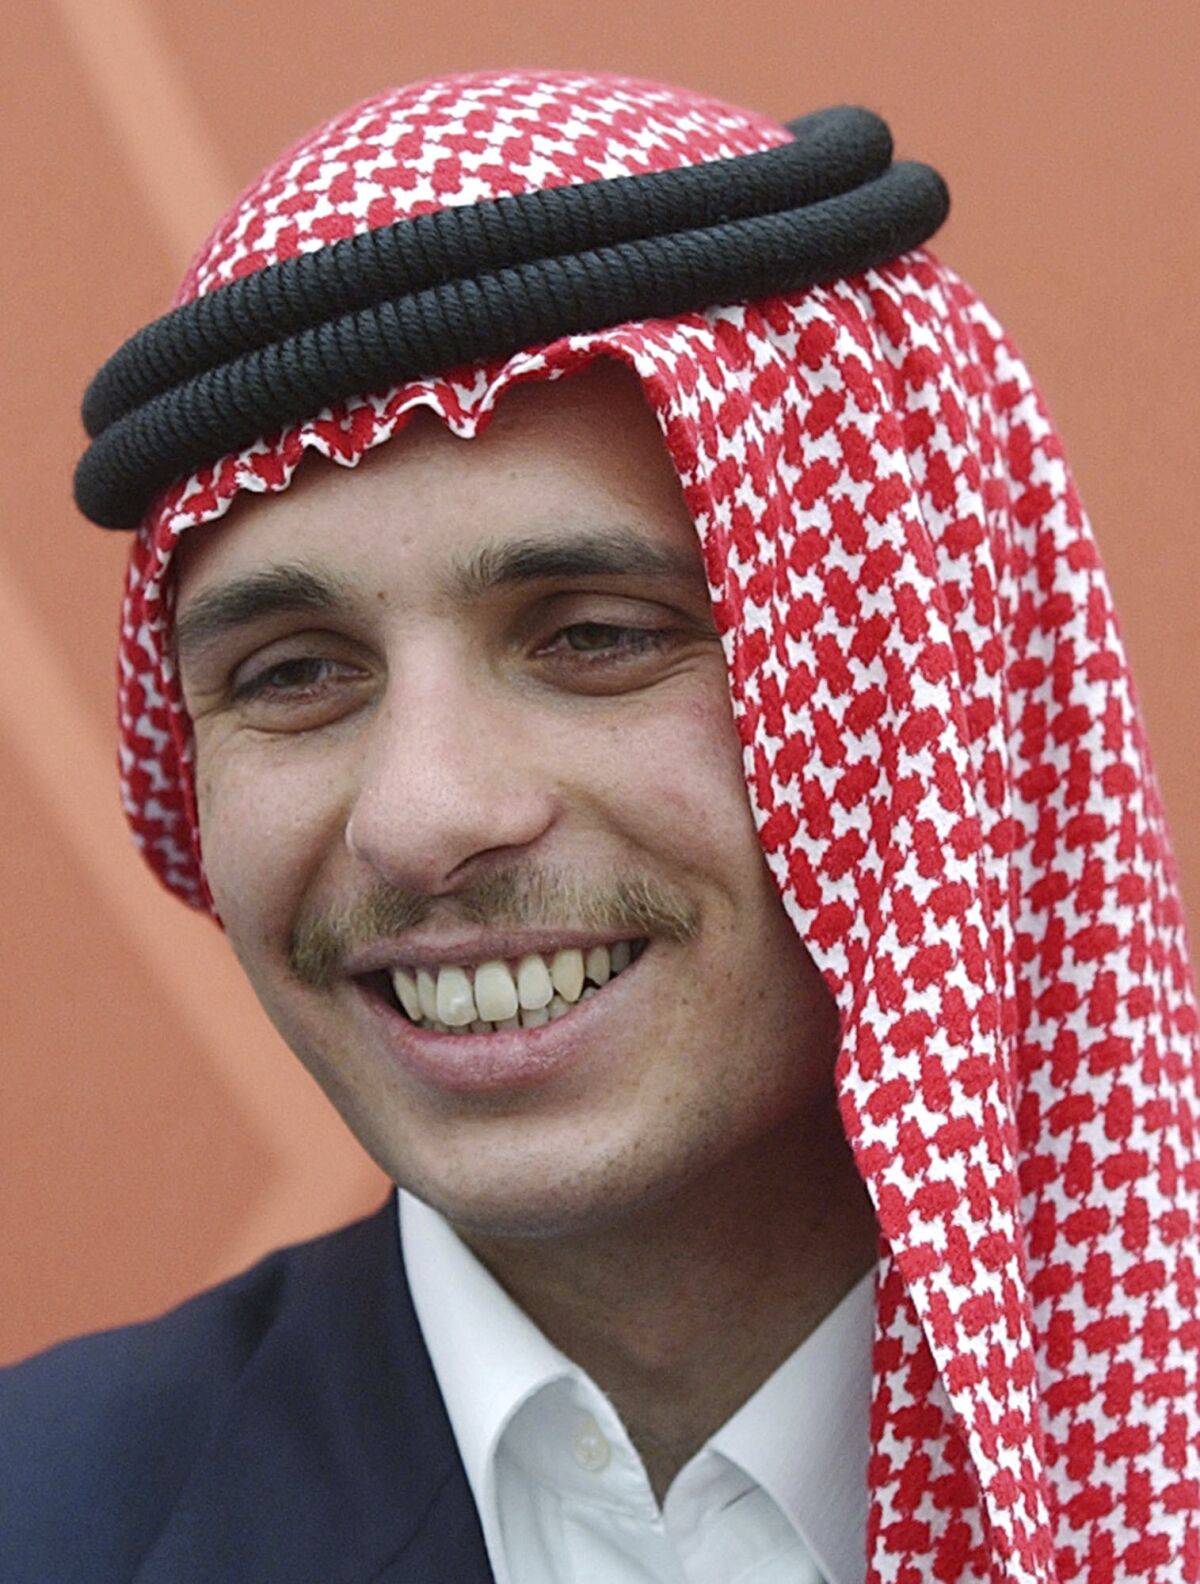 FILE - Jordan's Crown Prince Hamzah smiles during a royal lunch hosted for tribesmen at the Royal Palace compound in Amman, Jordan in this May 26, 2004, file photo. The royal court in Jordan said Tuesday, March 8, 2022, that the half-brother of King Abdullah II has apologized for his role in a rare palace feud last year and is seeking the king's forgiveness. Prince Hamzah was accused of involvement in a plot to destabilize the Western-allied kingdom and was placed under house arrest last April. (AP Photo/Hussein Malla, File)